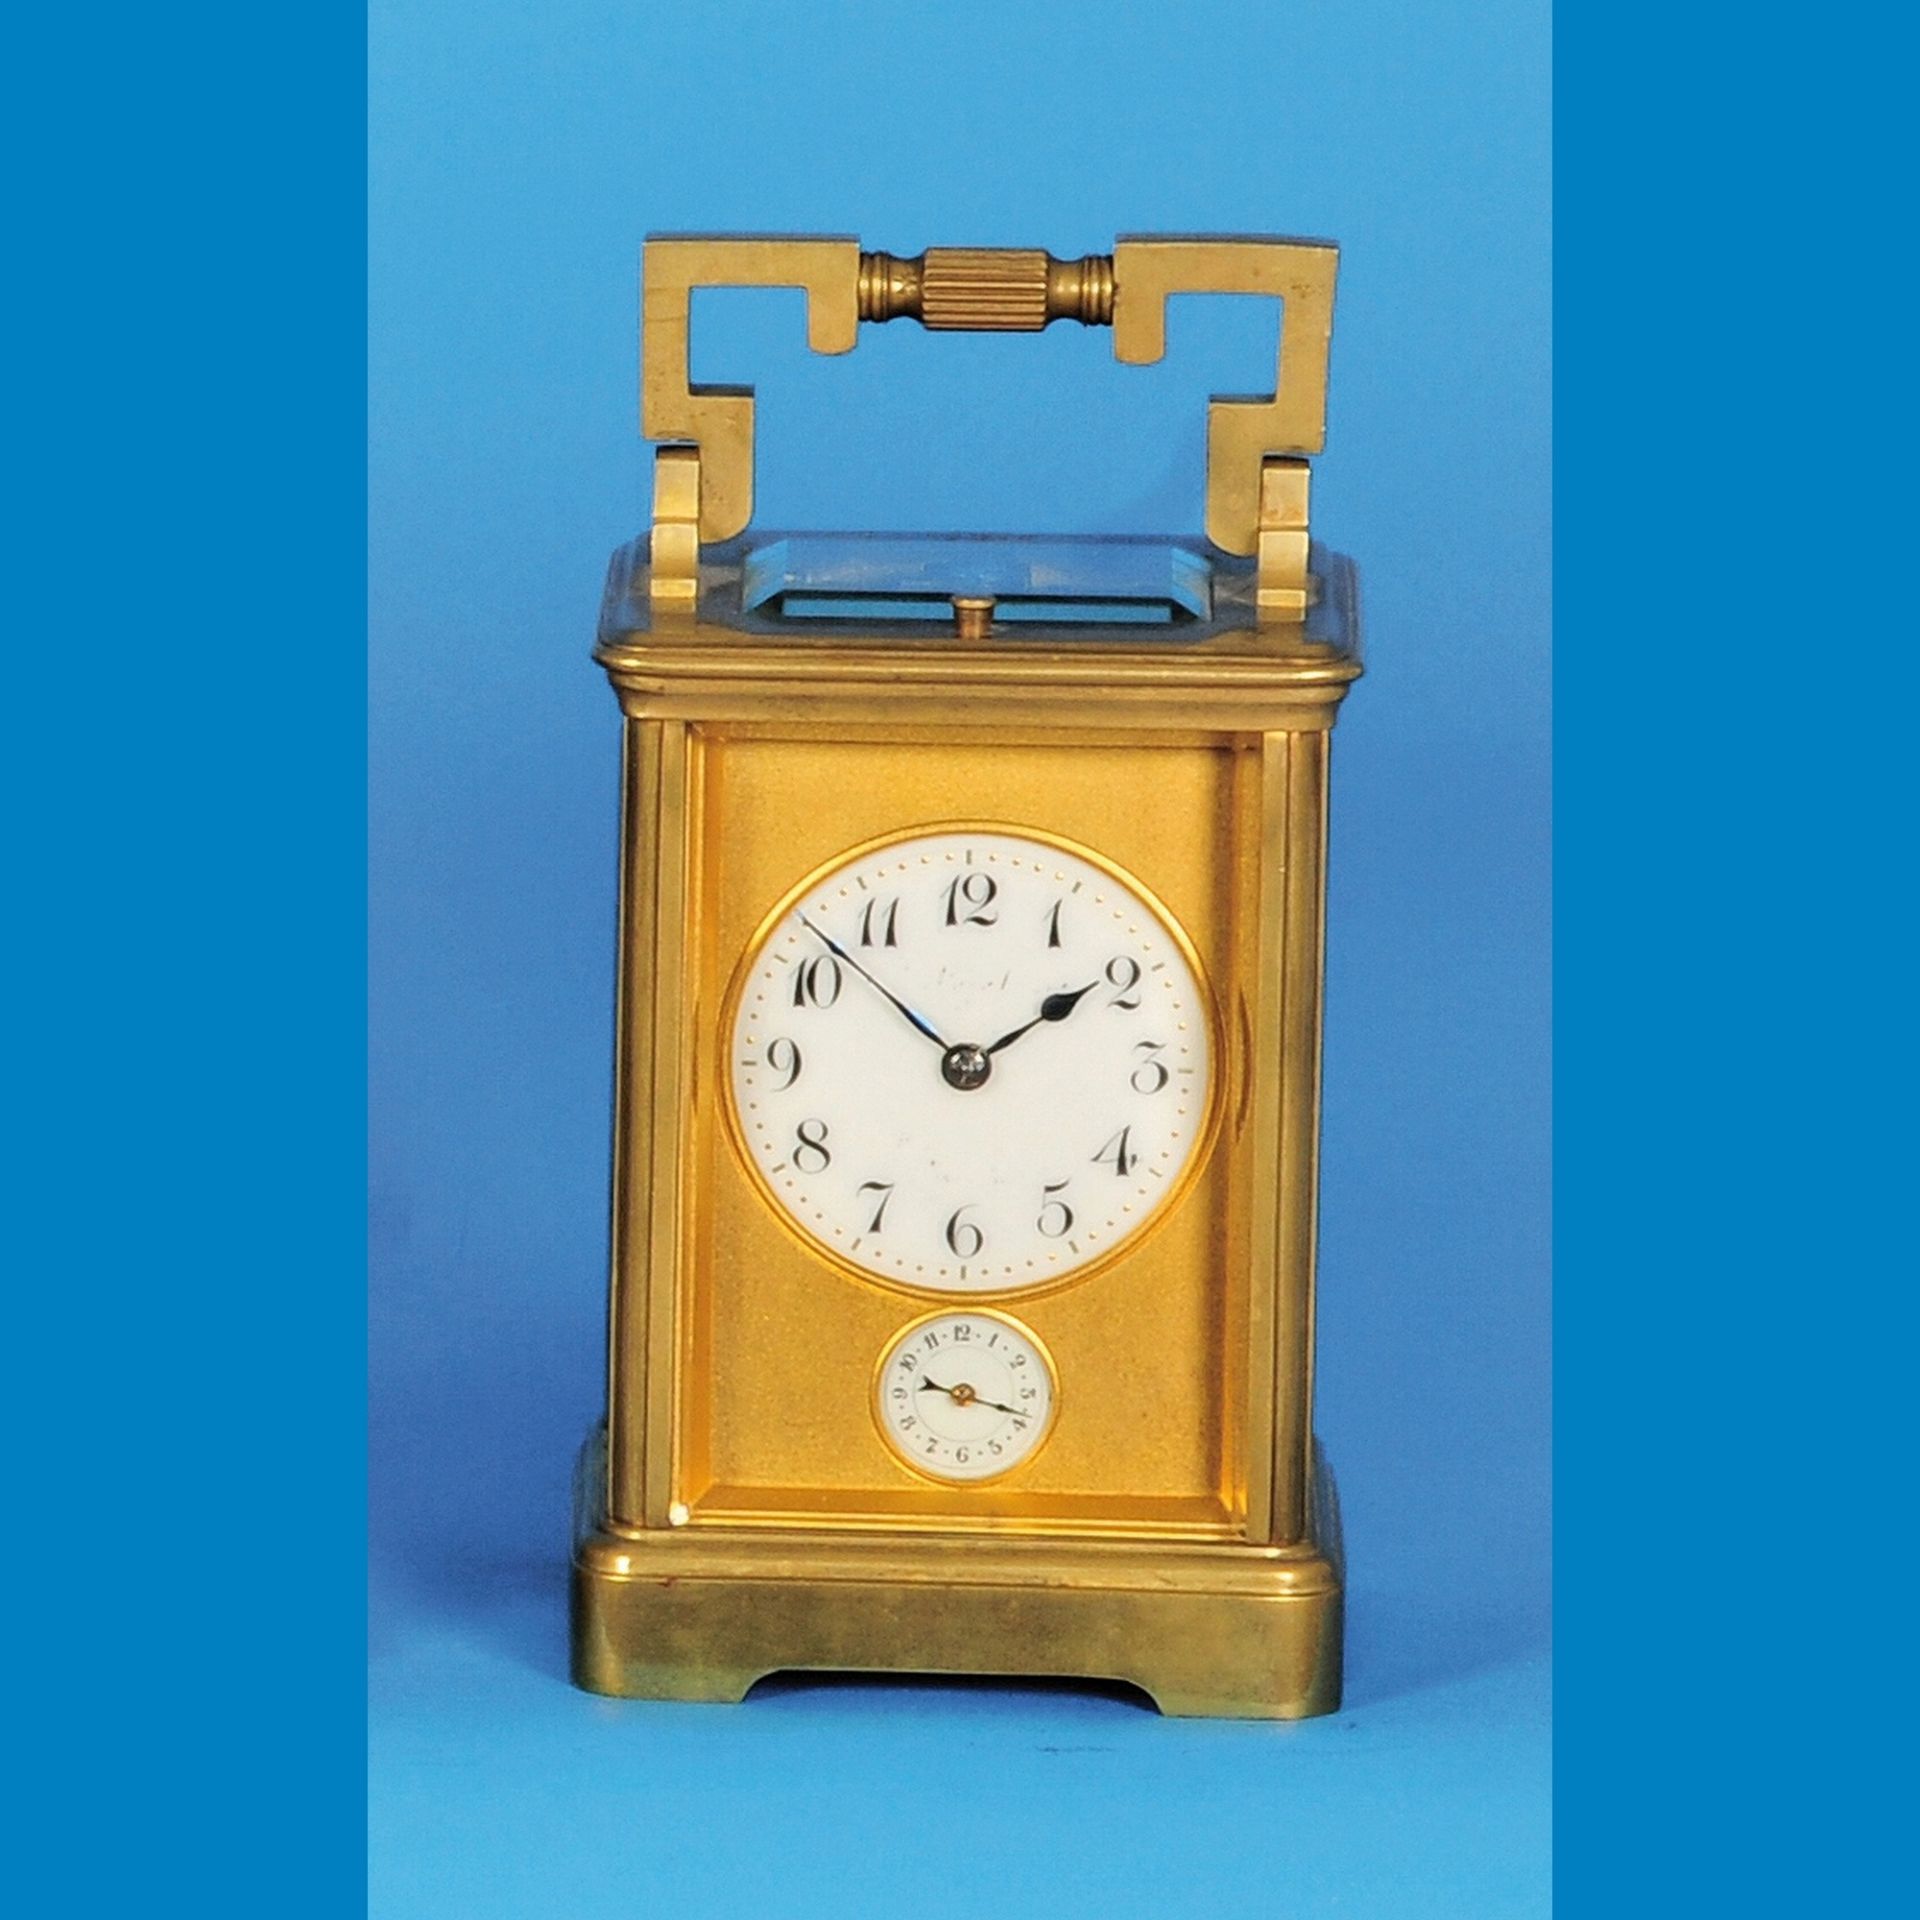 Travel clock with half-hour strike and alarm on gong